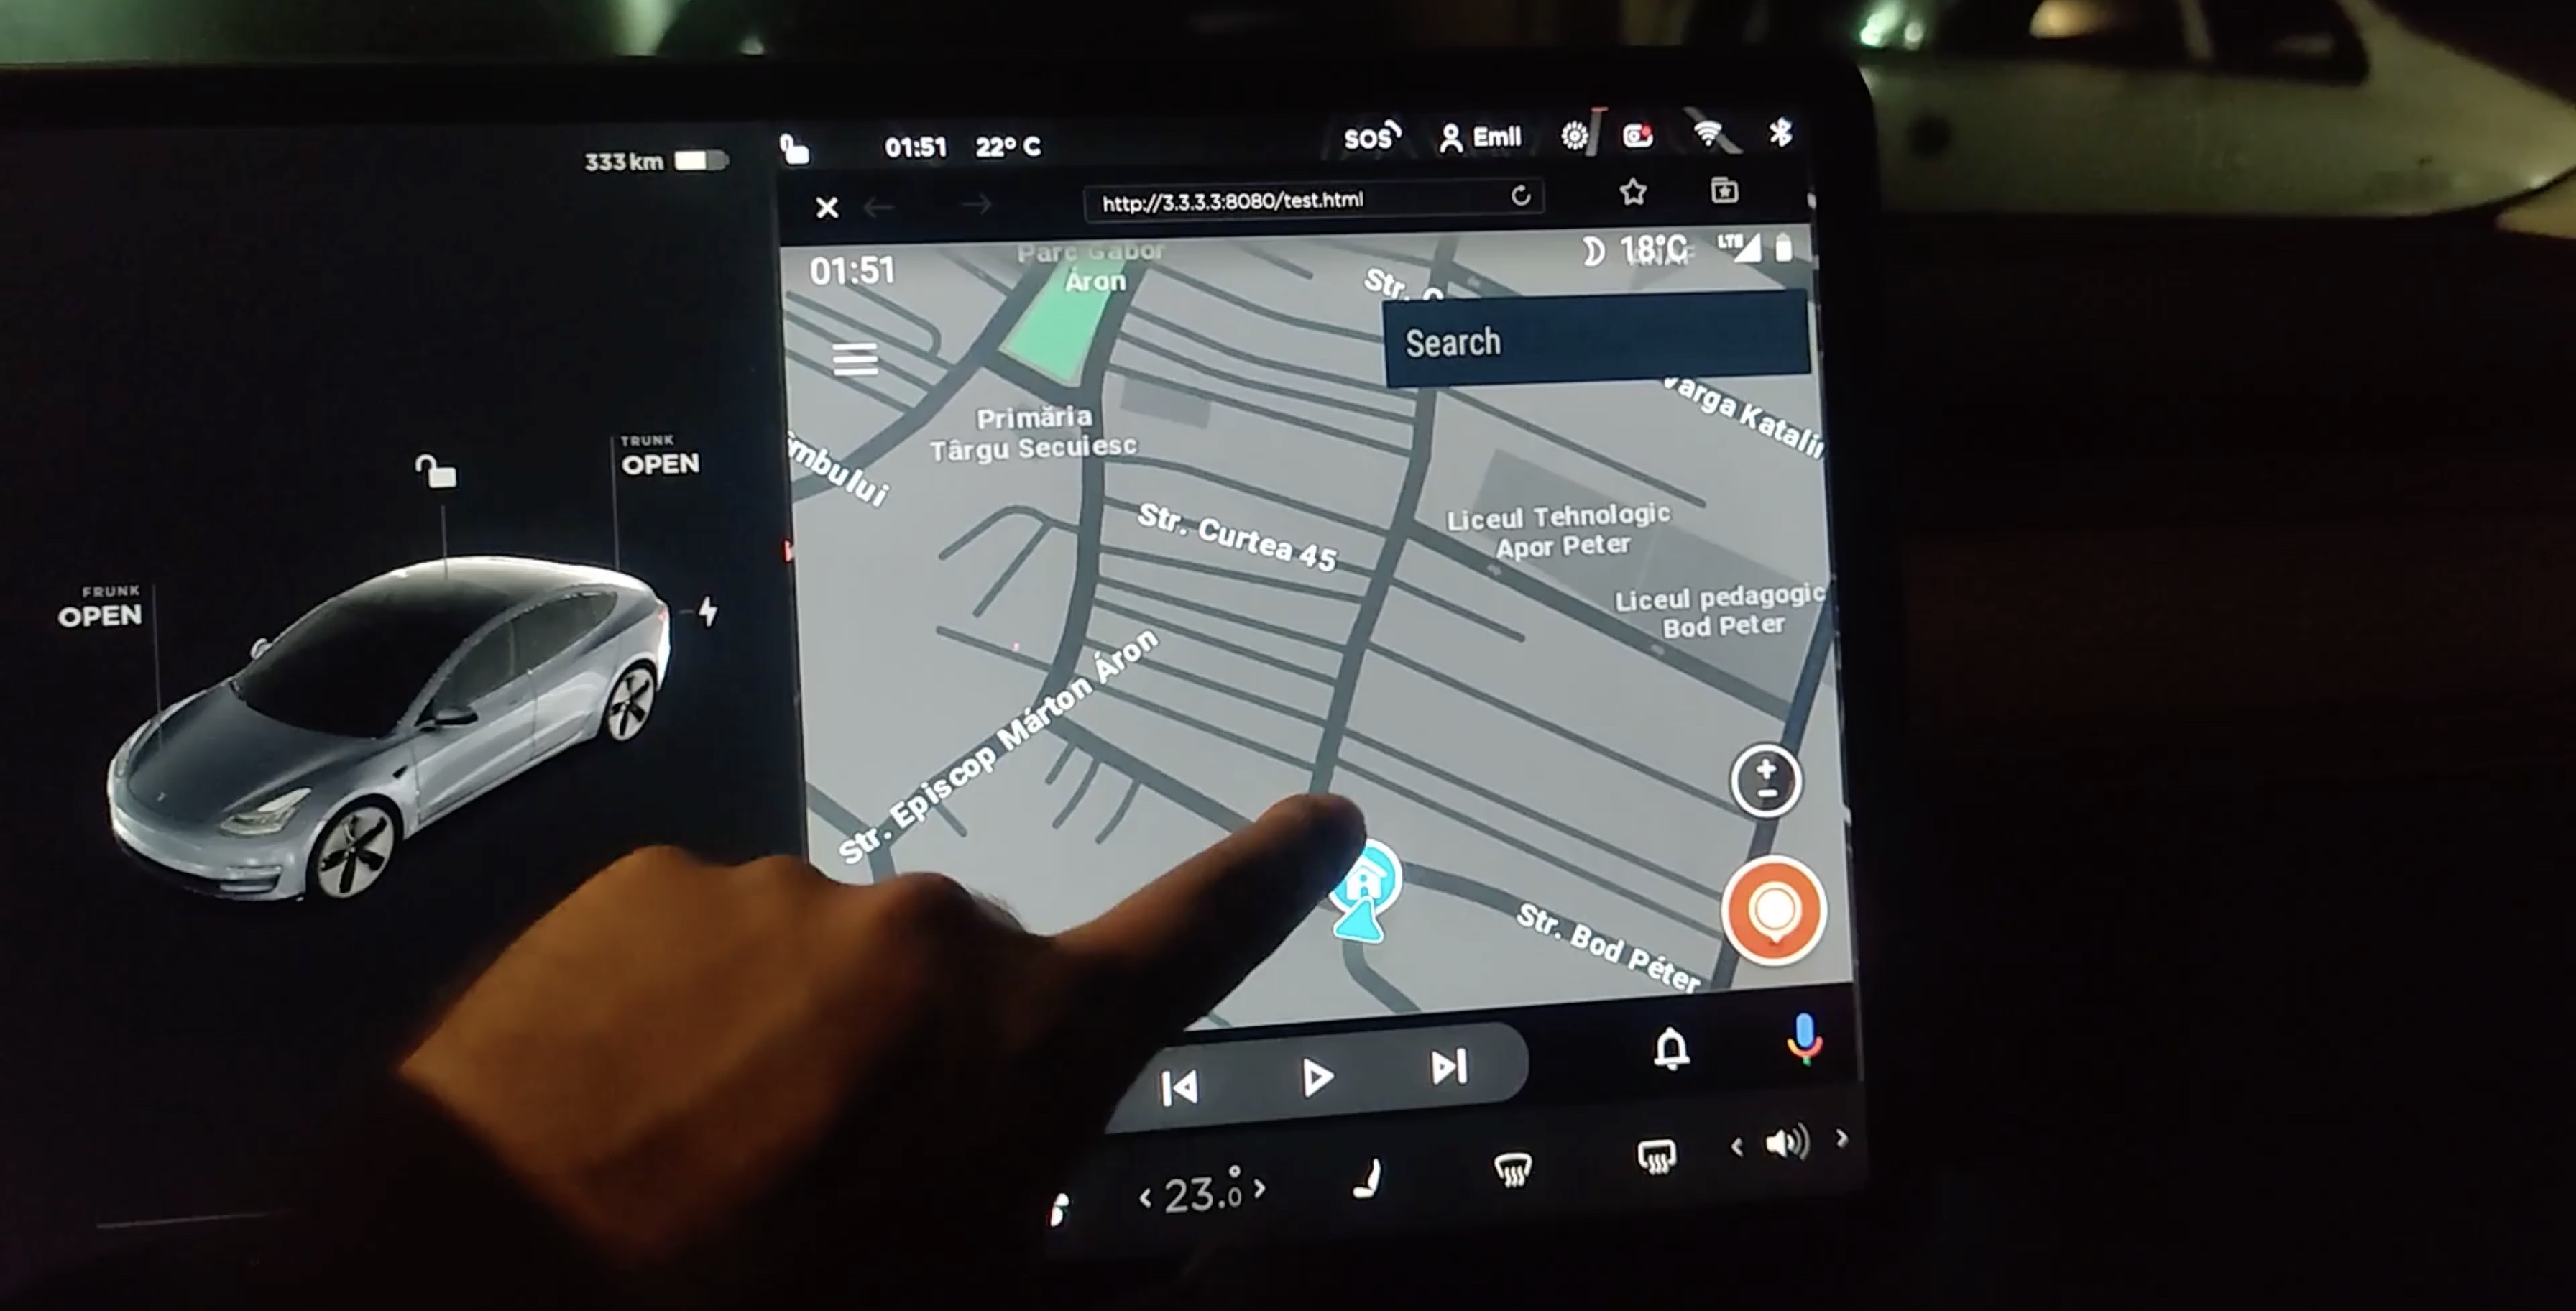 Android Auto now works in Tesla vehicles through the browser